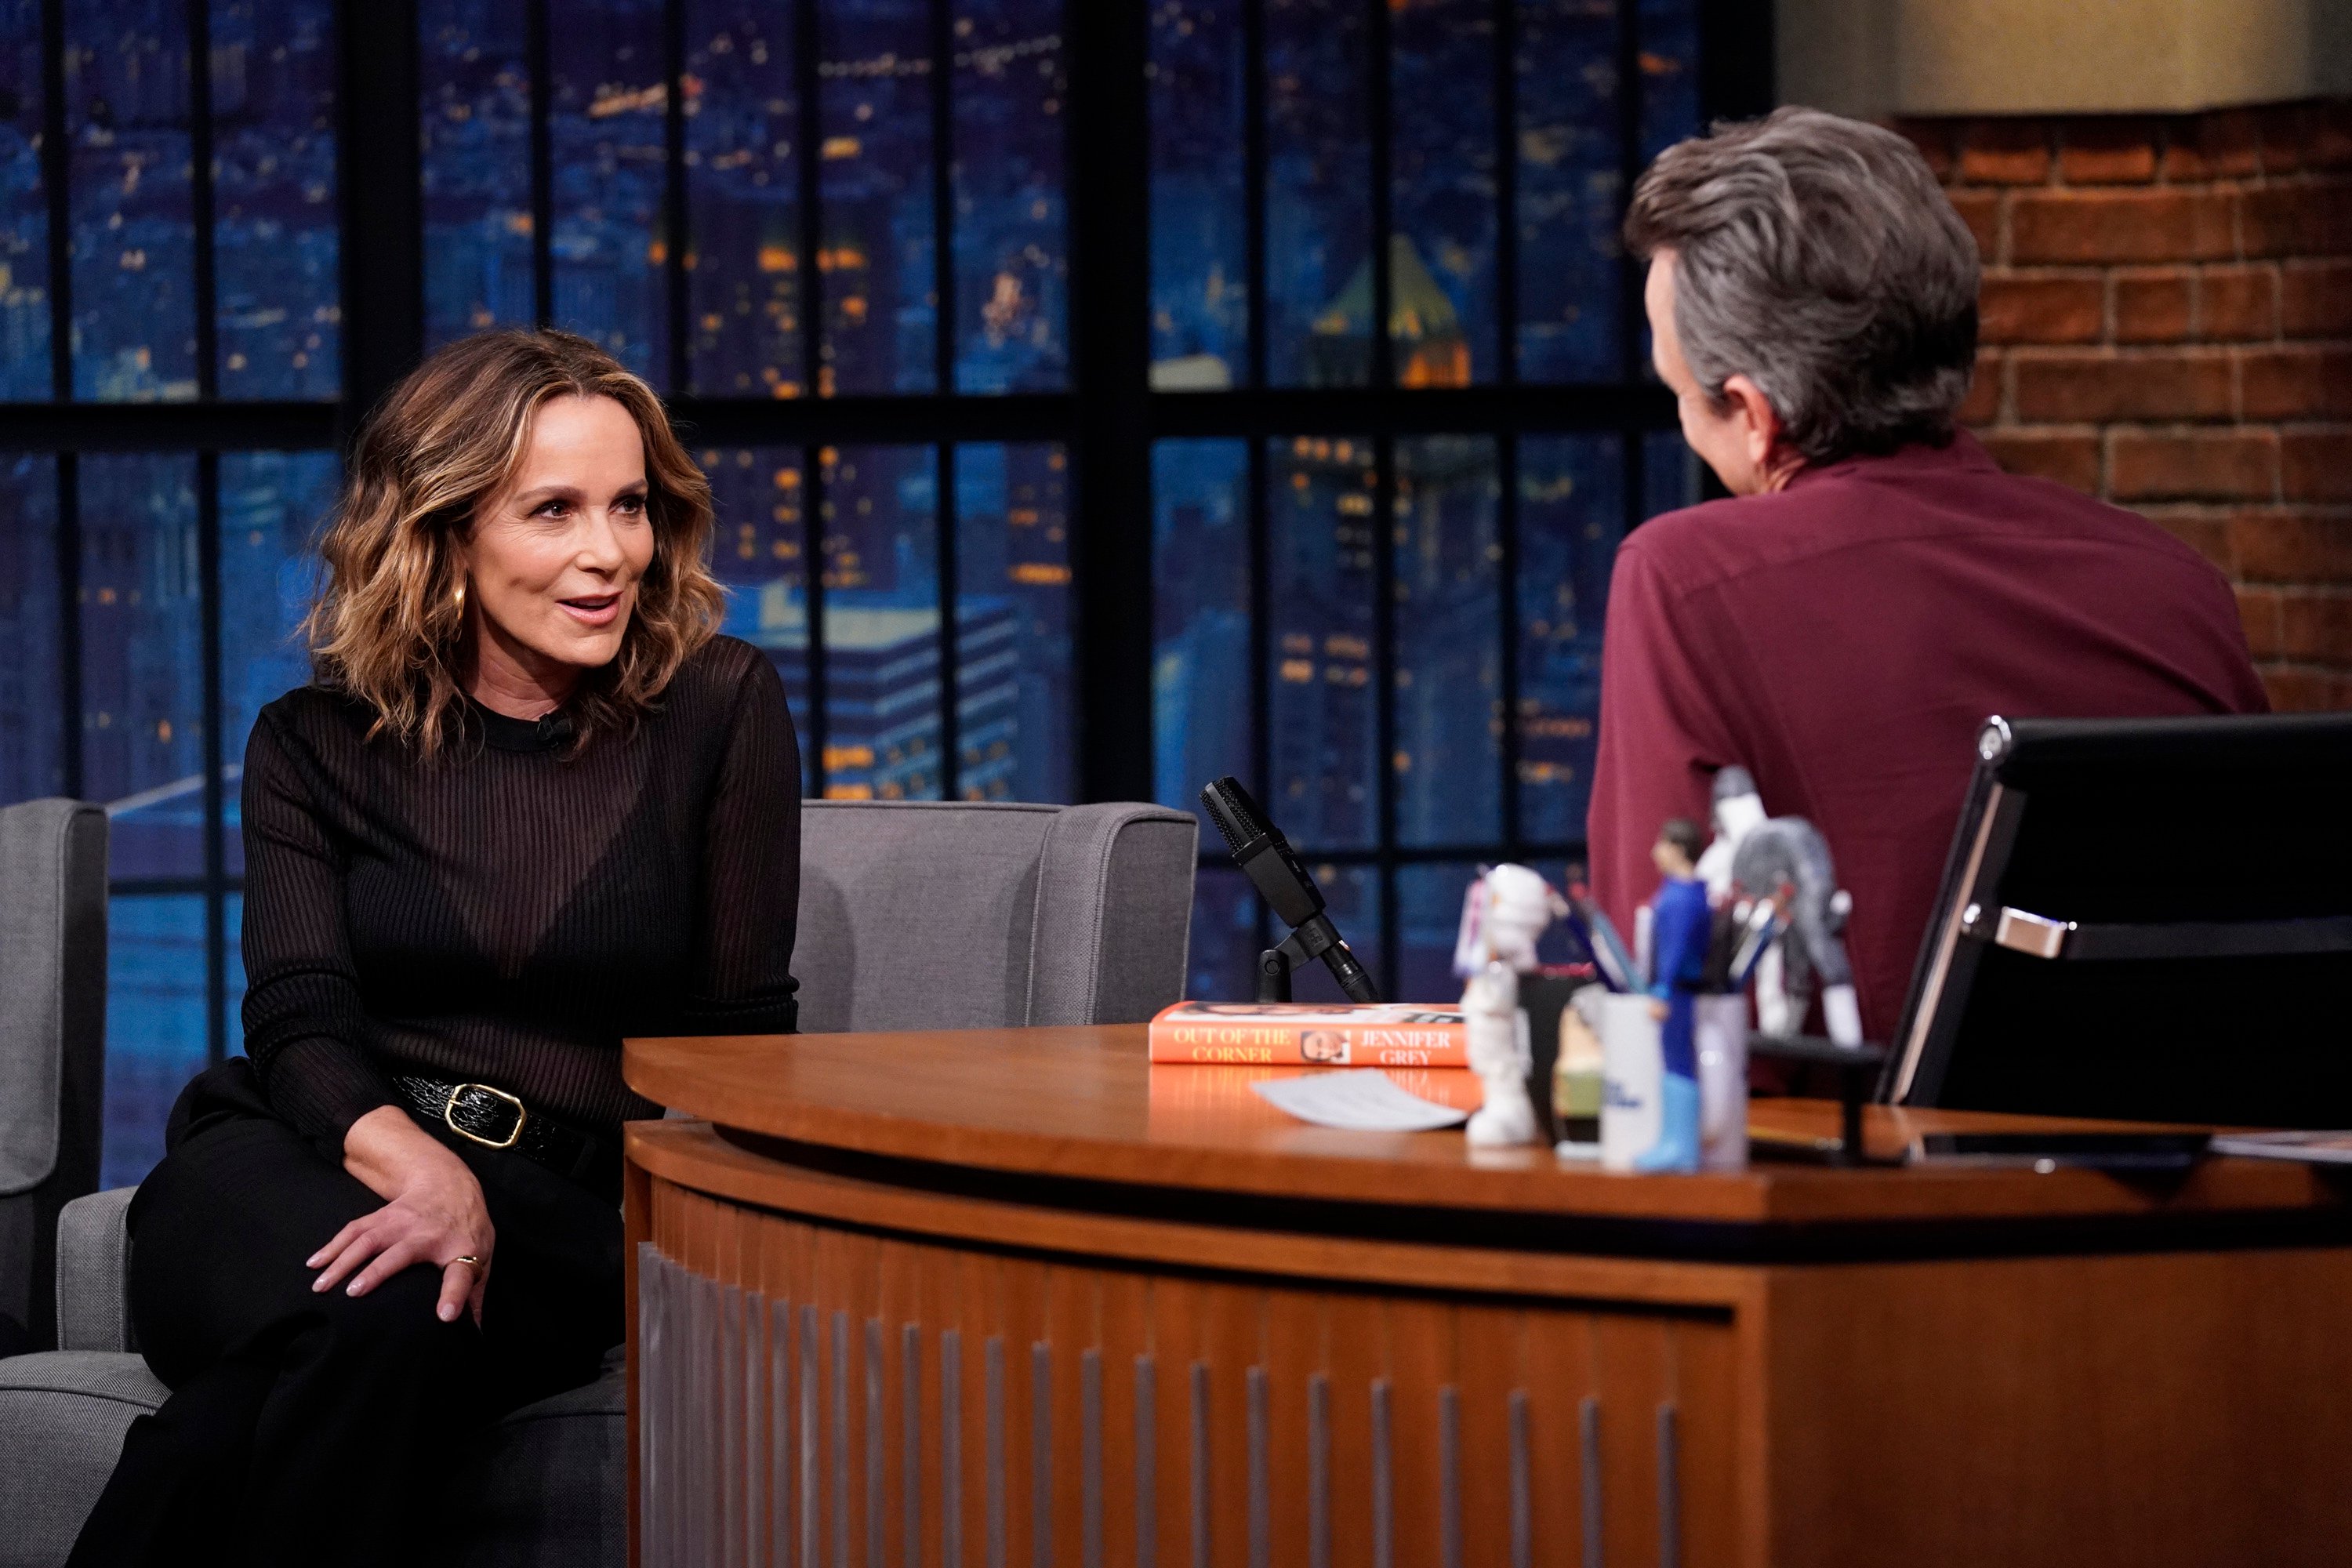 Jennifer Grey talks during an interview with Seth Meyers.